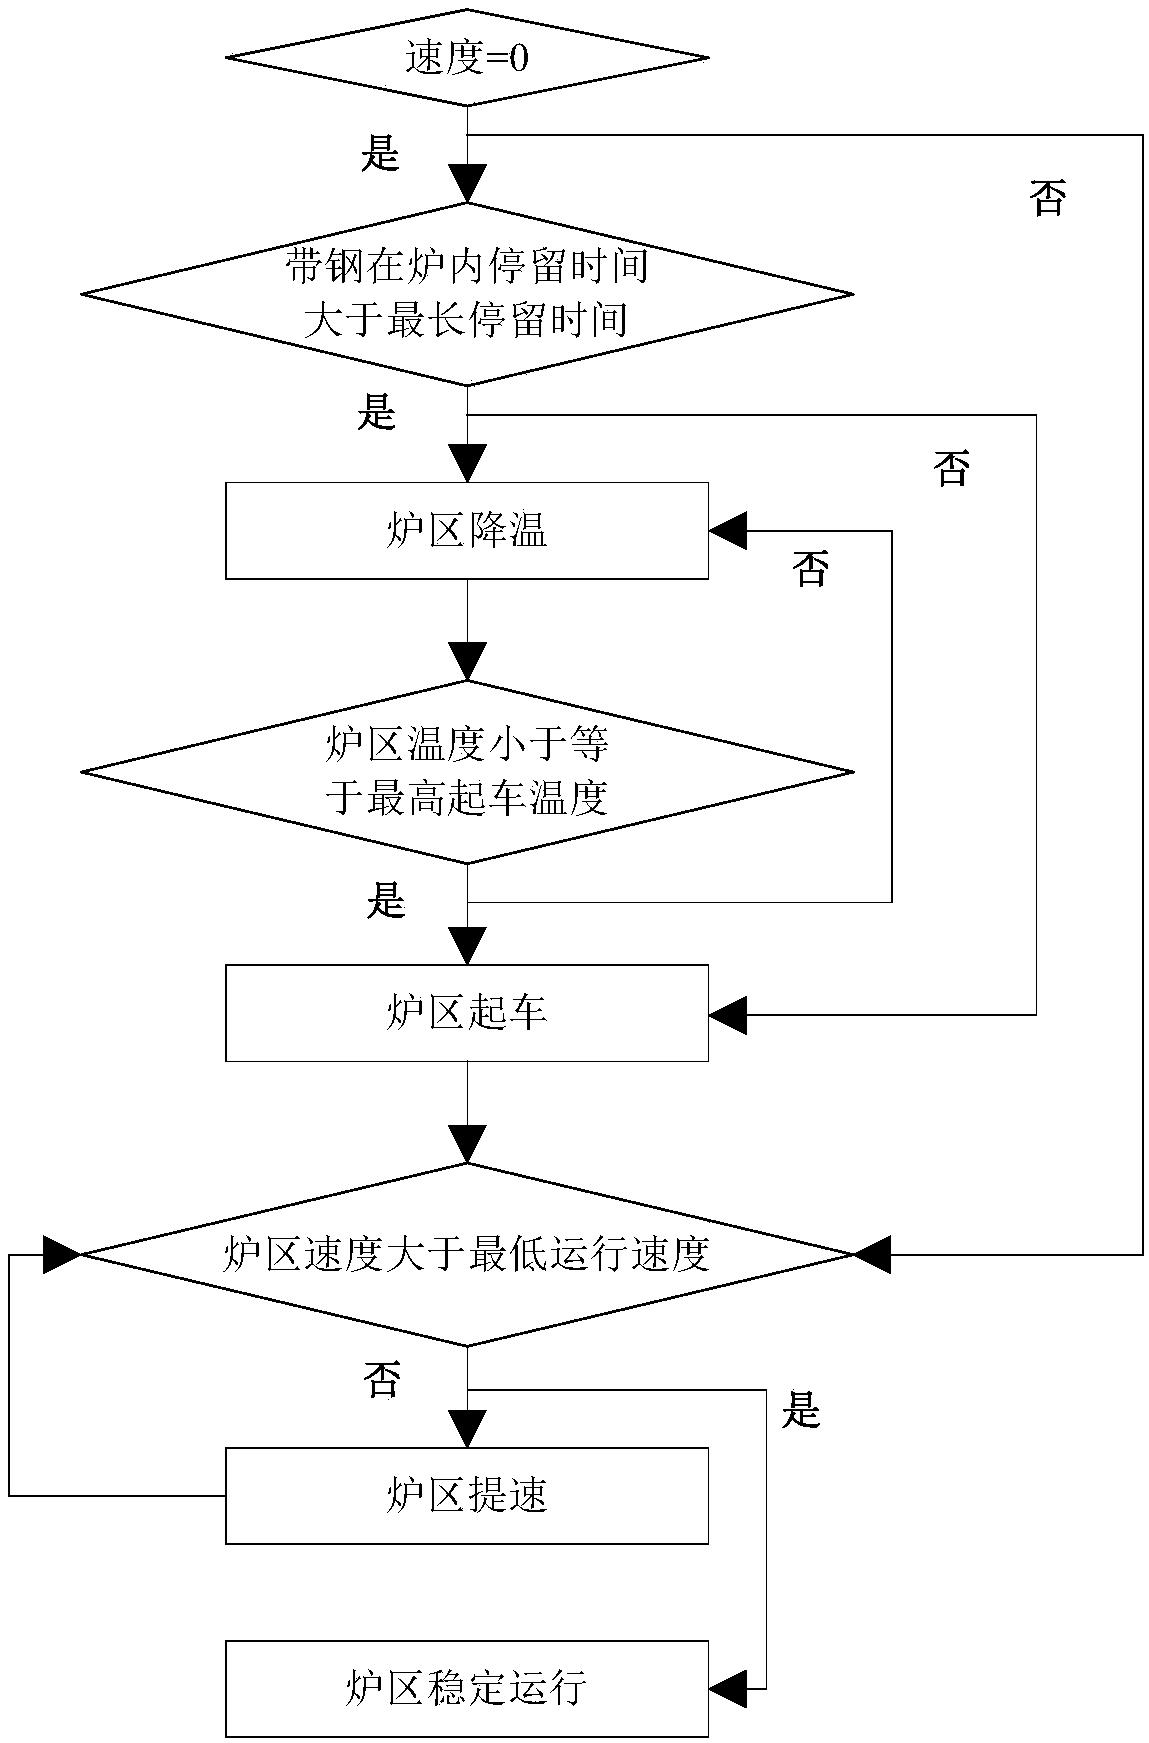 Method for preventing strip steel from buckling in annealing furnace